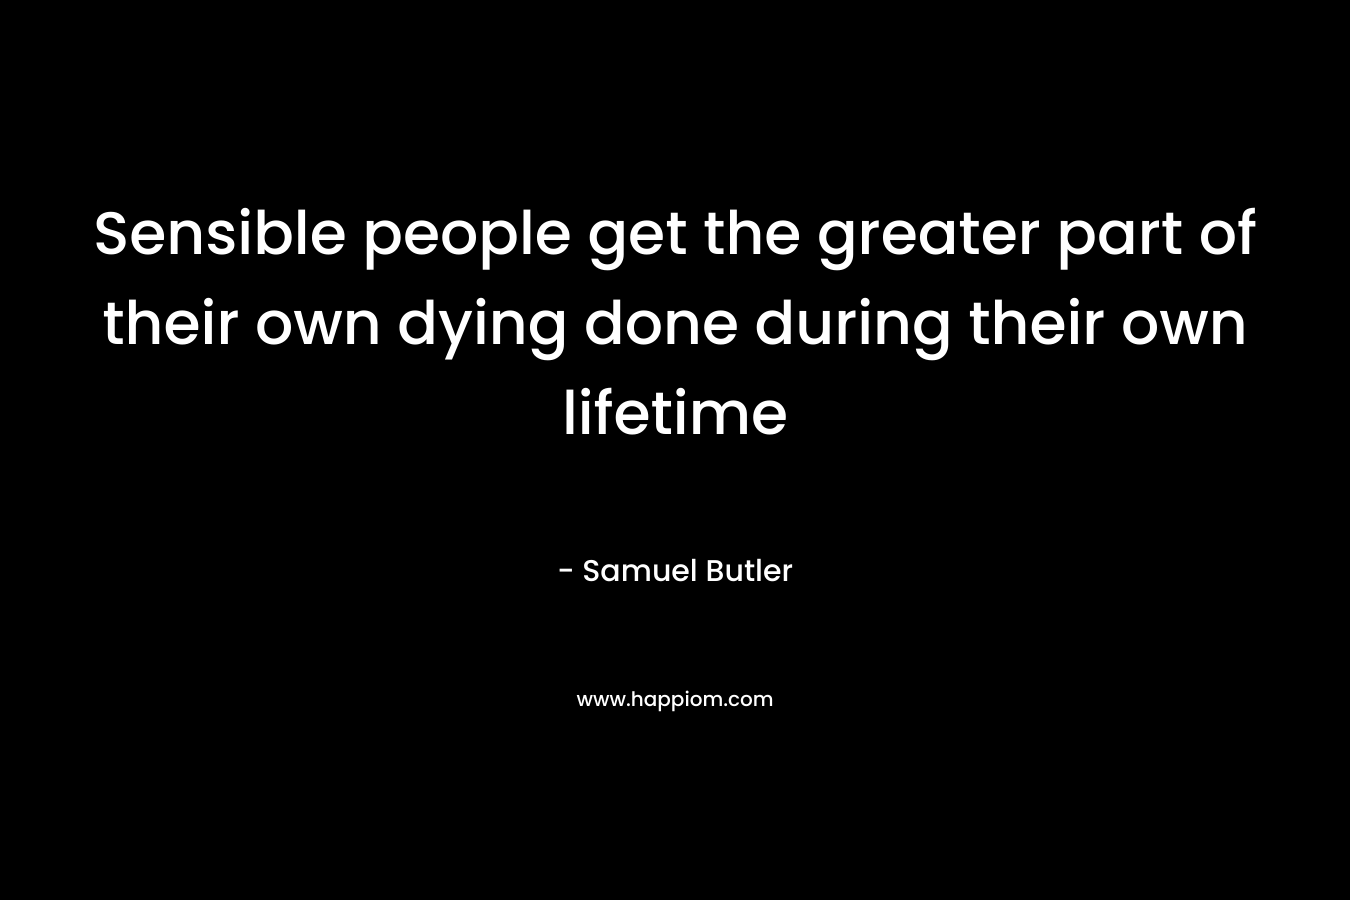 Sensible people get the greater part of their own dying done during their own lifetime